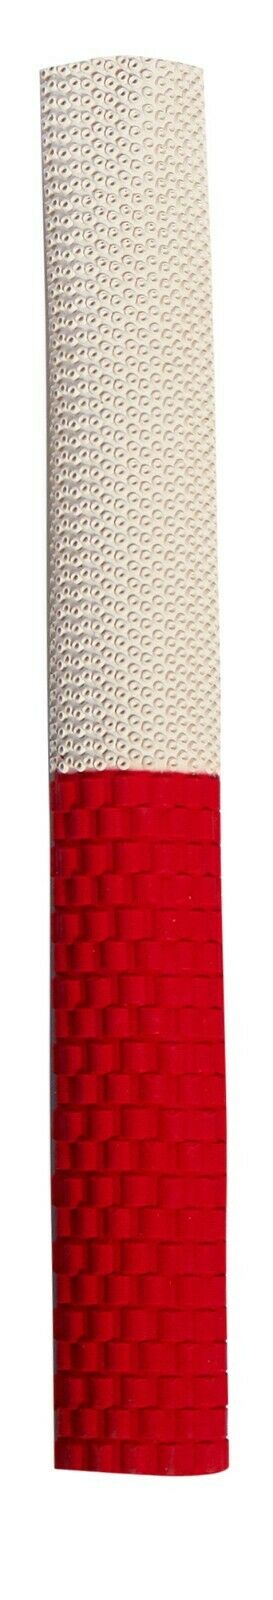 ND FX1 Cricket Bat Grip. Octopus and Arc Technology White/Red